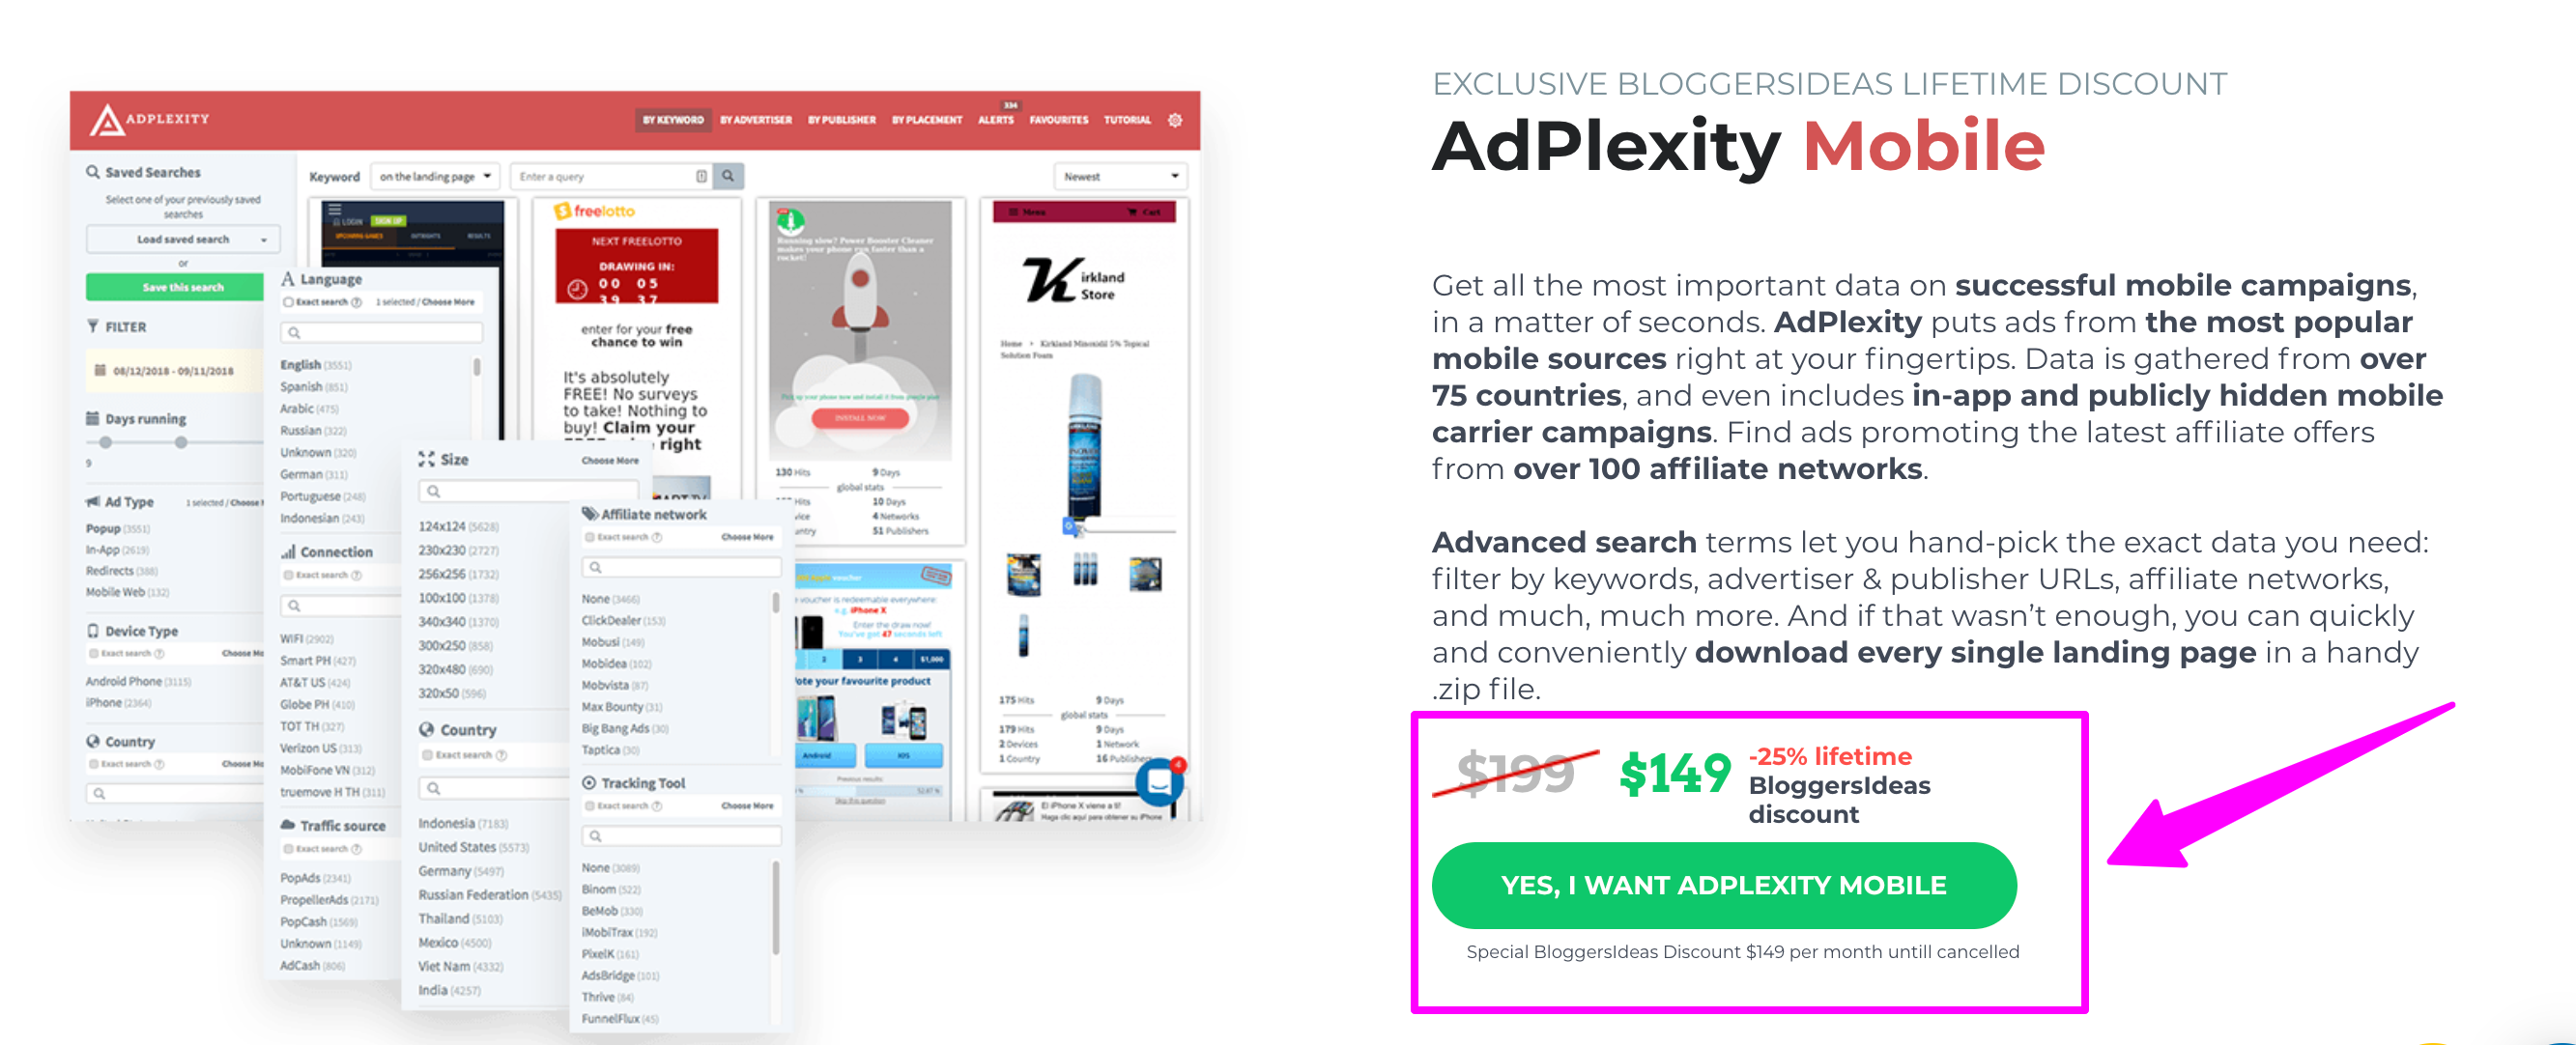 adpelxity for mobile